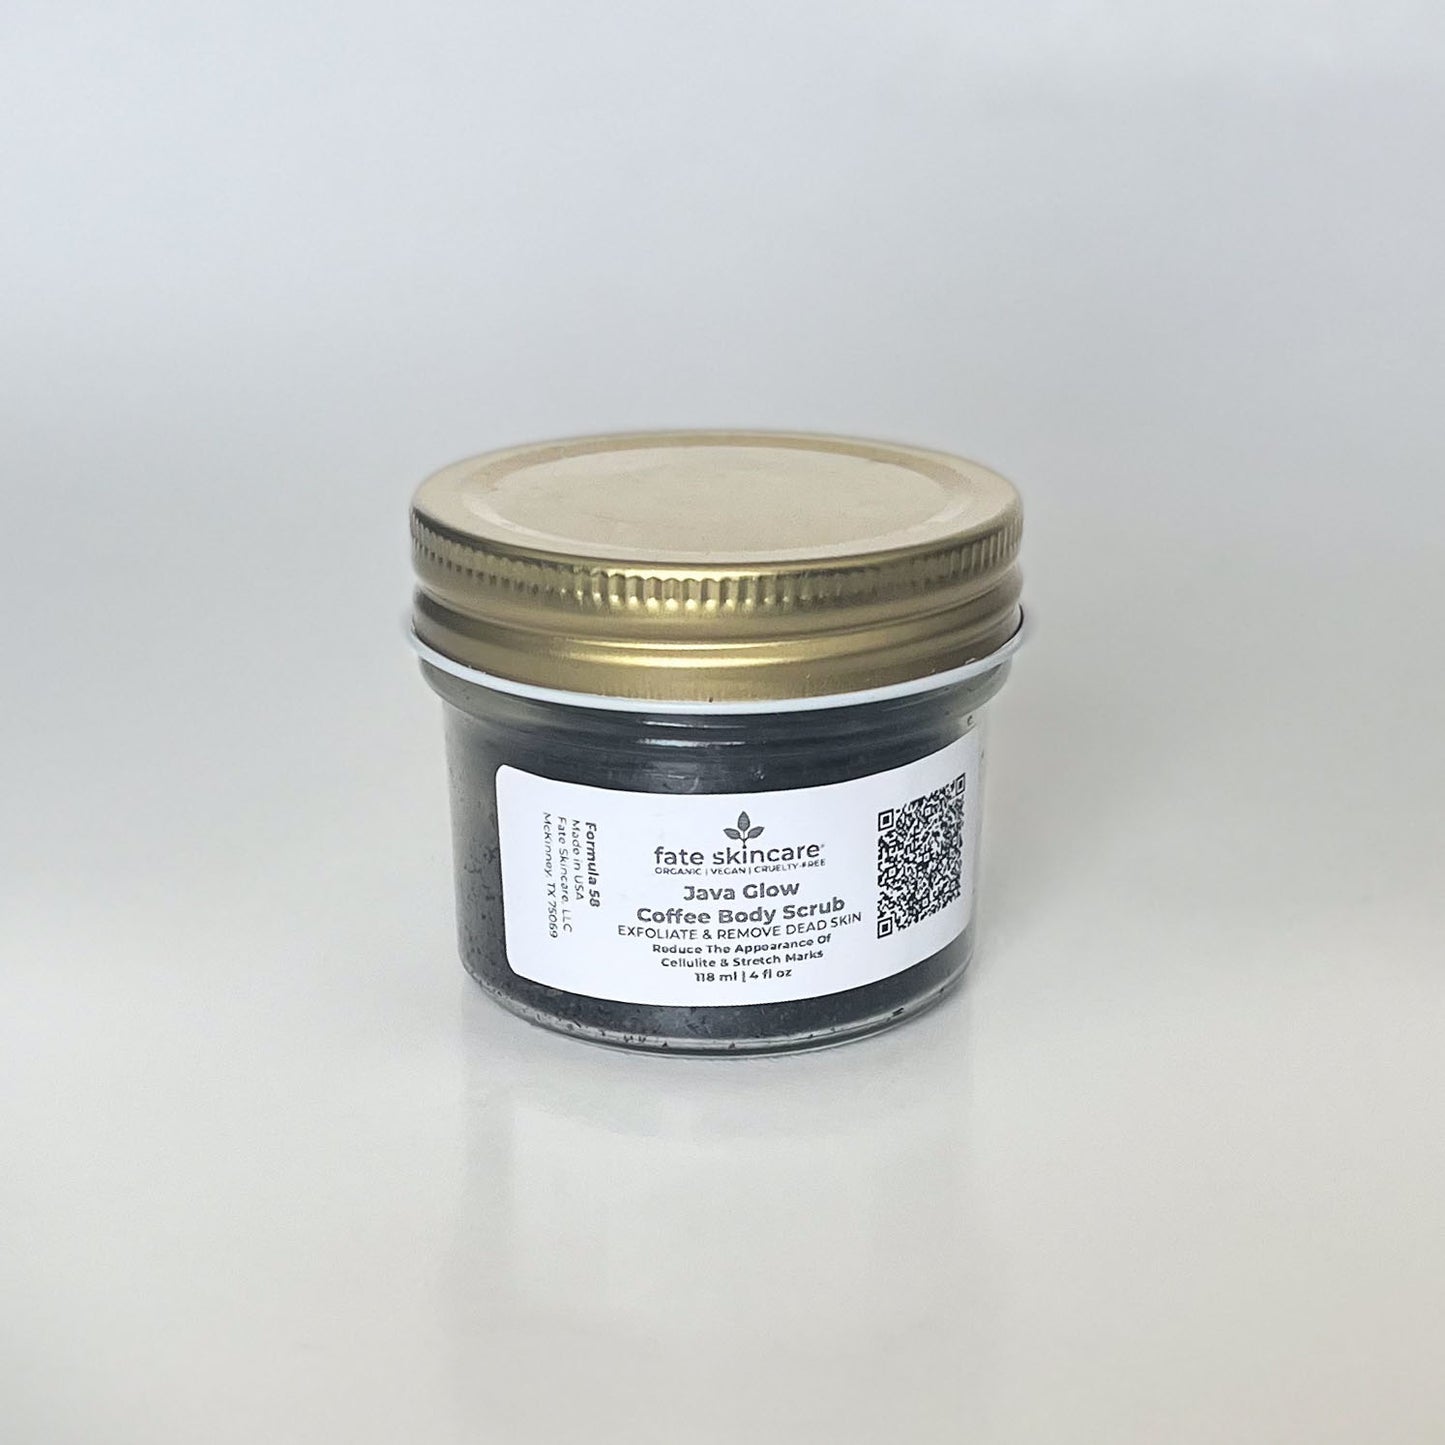 Fate Skincare's Java Glow Coffee Body Scrub in a clear glass jar with a brass lid, featuring a rectangular label displaying the product name and company logo.